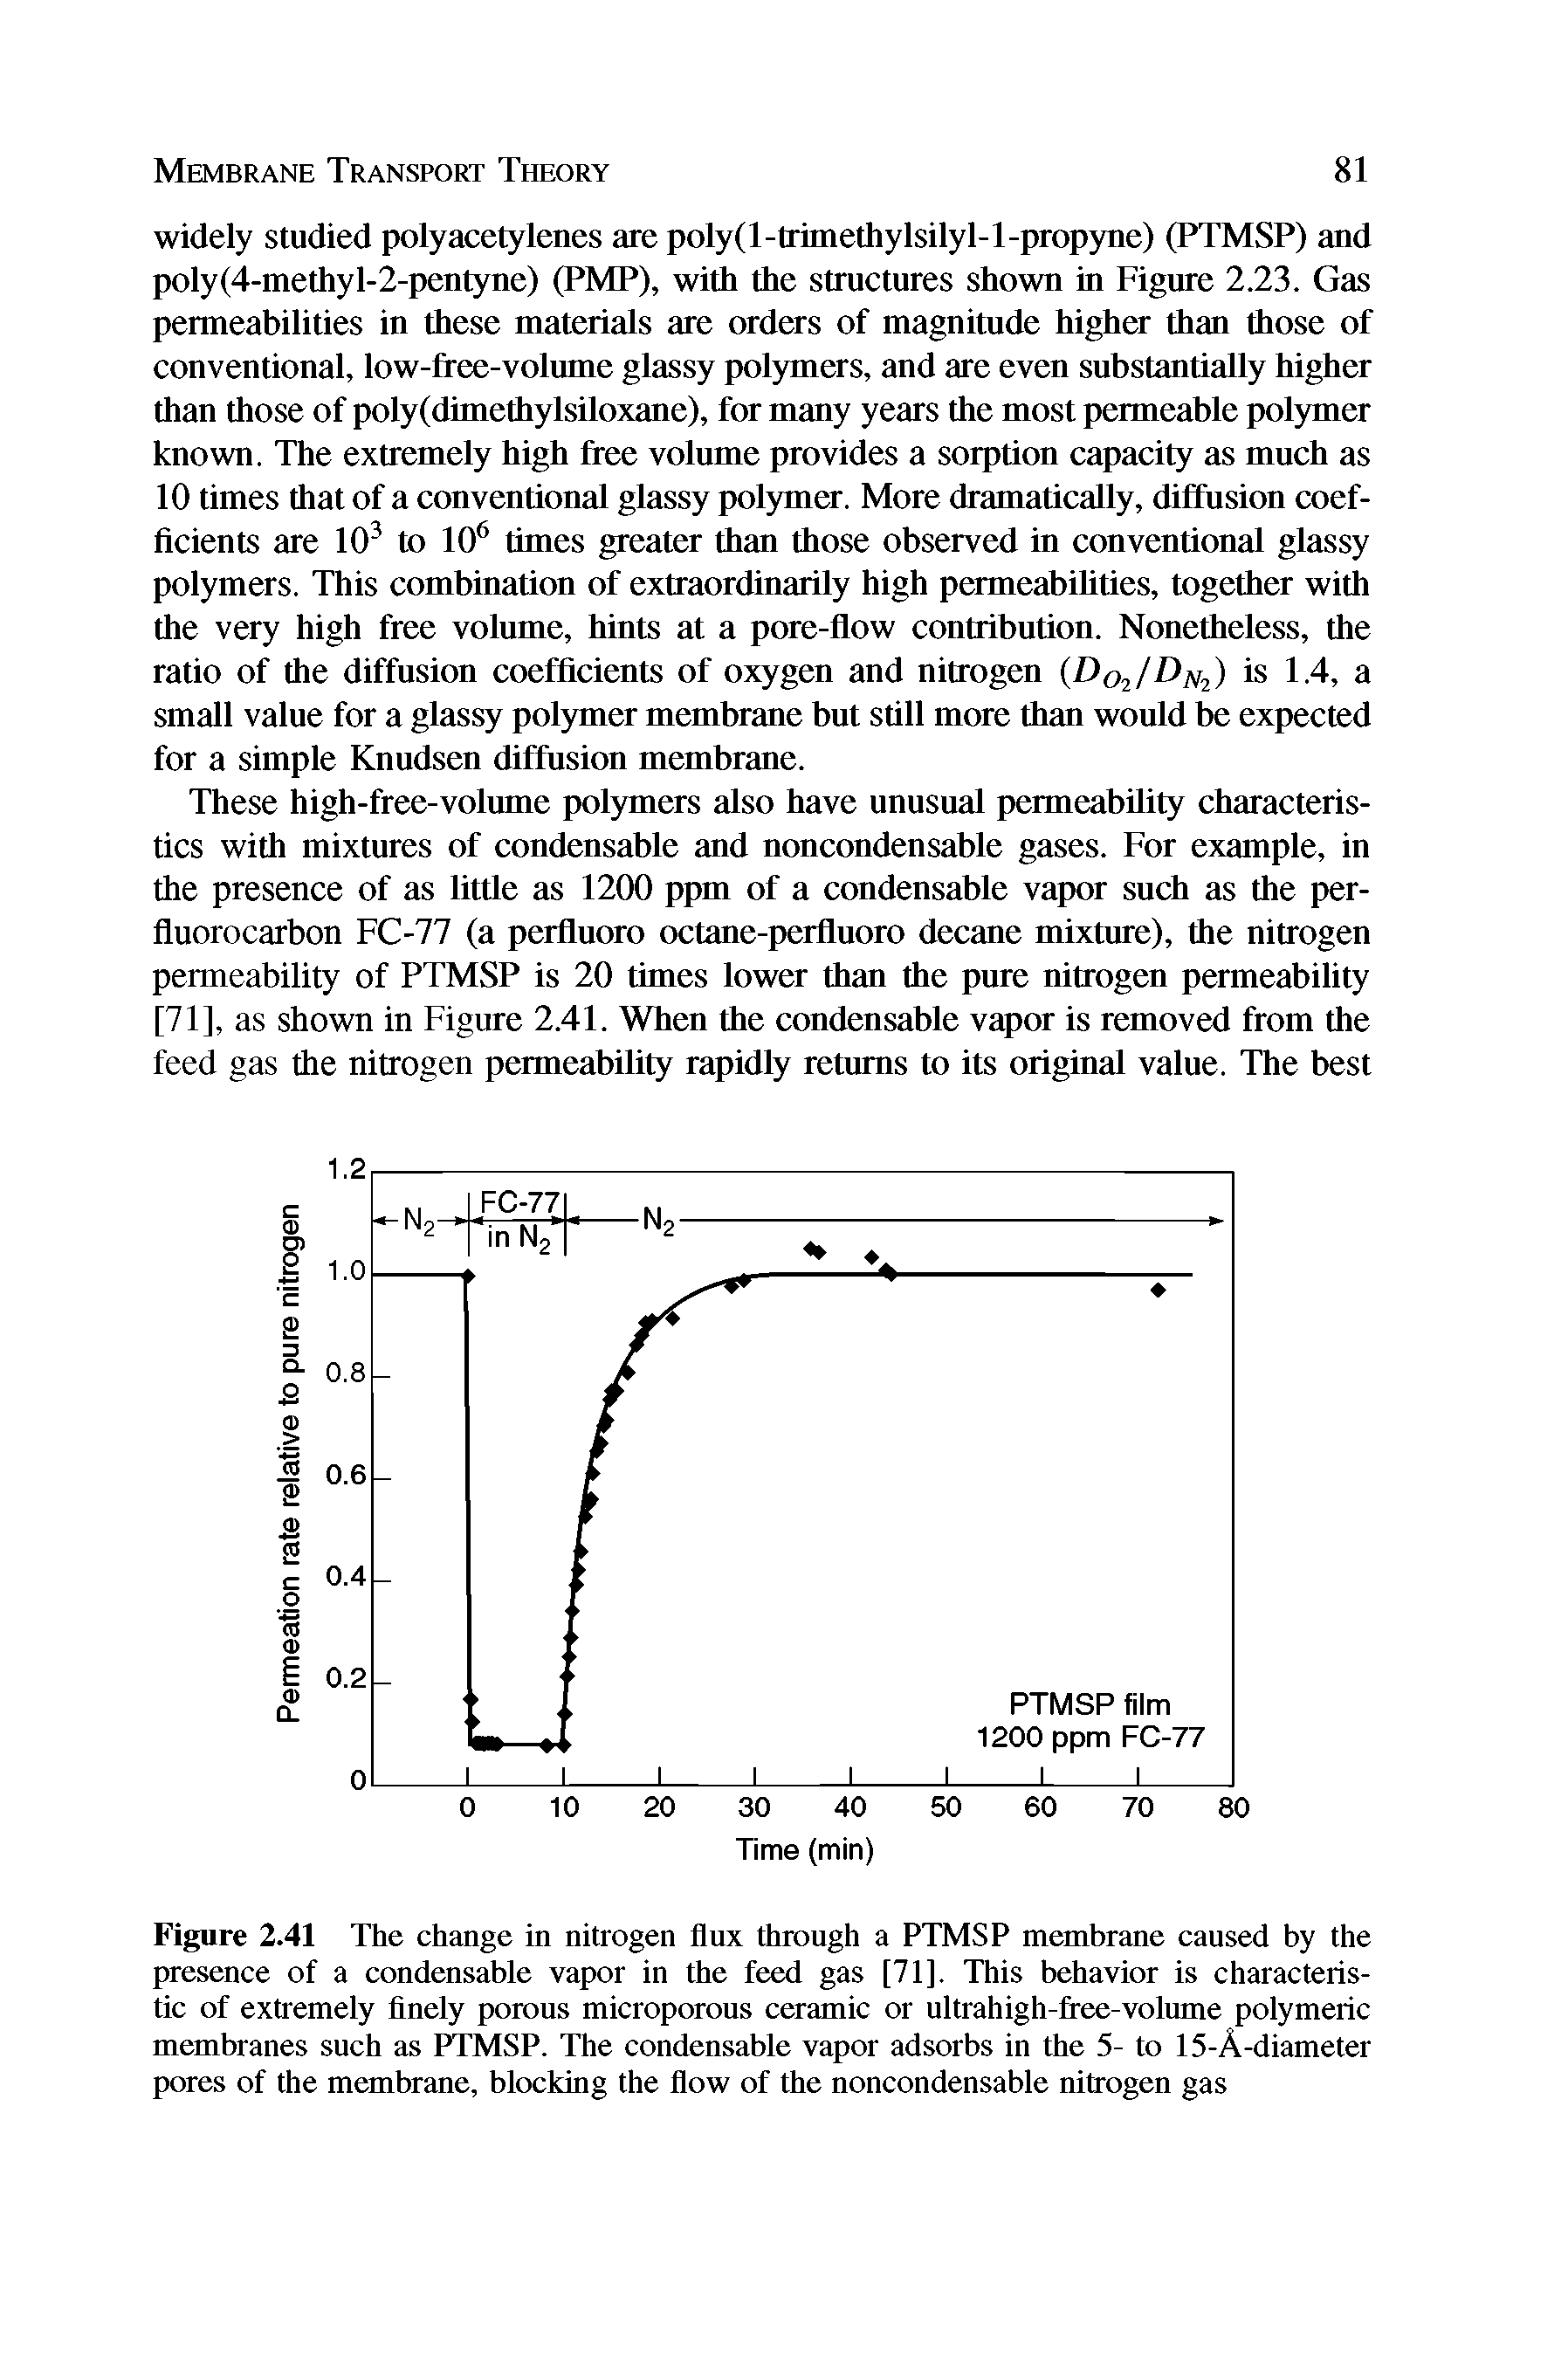 Figure 2.41 The change in nitrogen flux through a PTMSP membrane caused by the presence of a condensable vapor in the feed gas [71]. This behavior is characteristic of extremely finely porous microporous ceramic or ultrahigh-free-volume polymeric membranes such as PTMSP. The condensable vapor adsorbs in the 5- to 15-A-diameter pores of the membrane, blocking the flow of the noncondensable nitrogen gas...